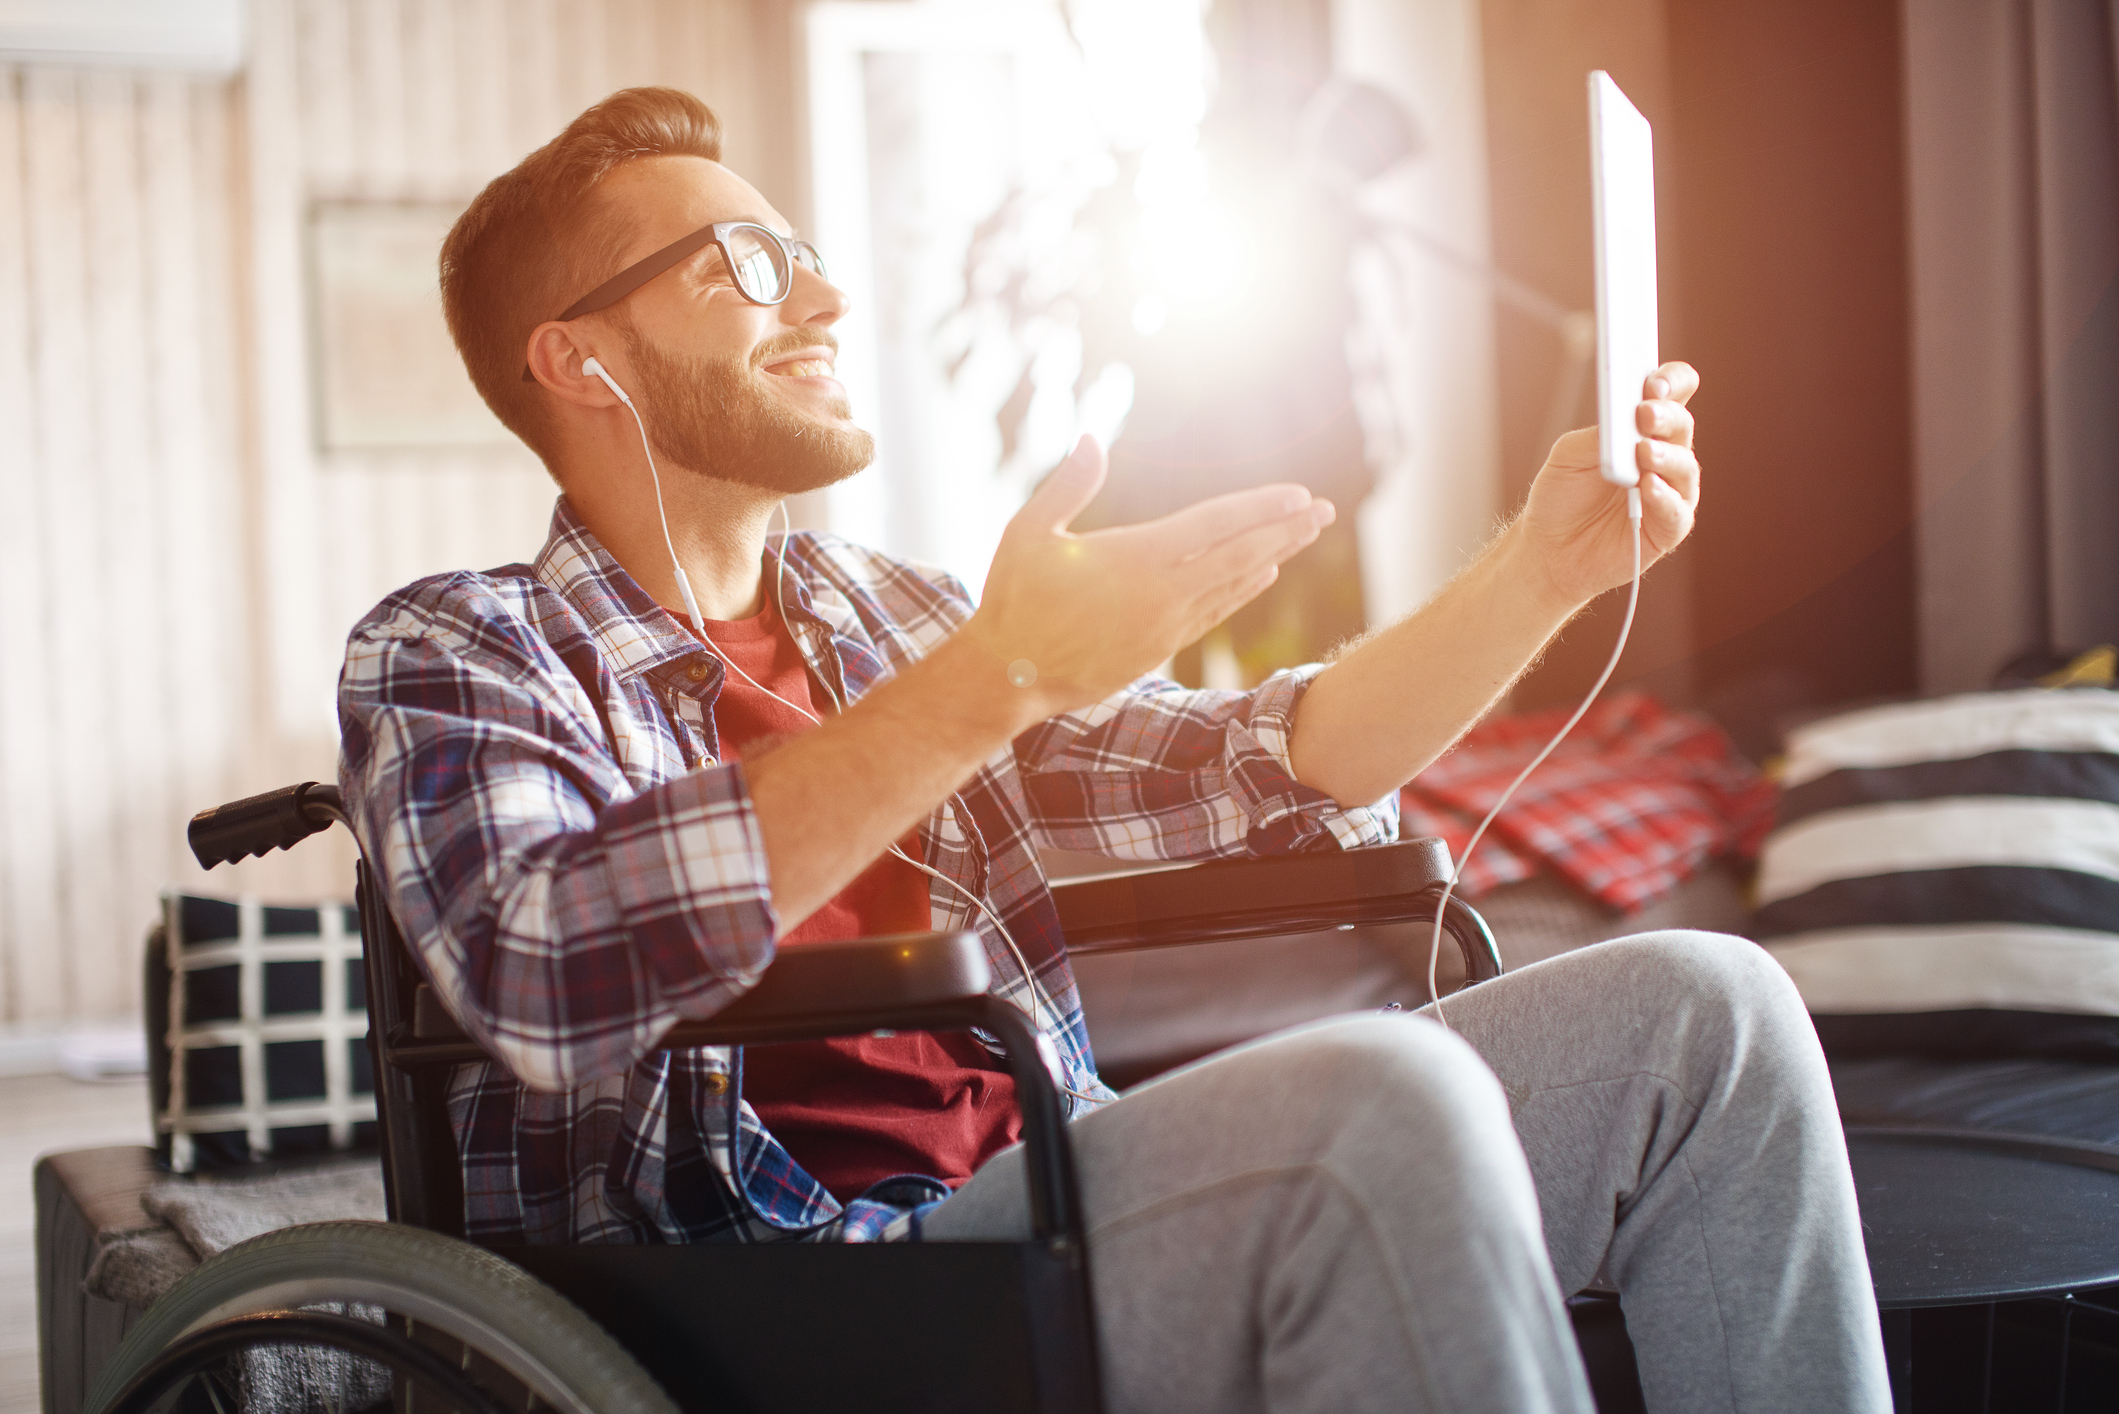 Assistive technology in home living: Disabled young man in wheelchair using tablet while being at home. He is gesturing during video call.